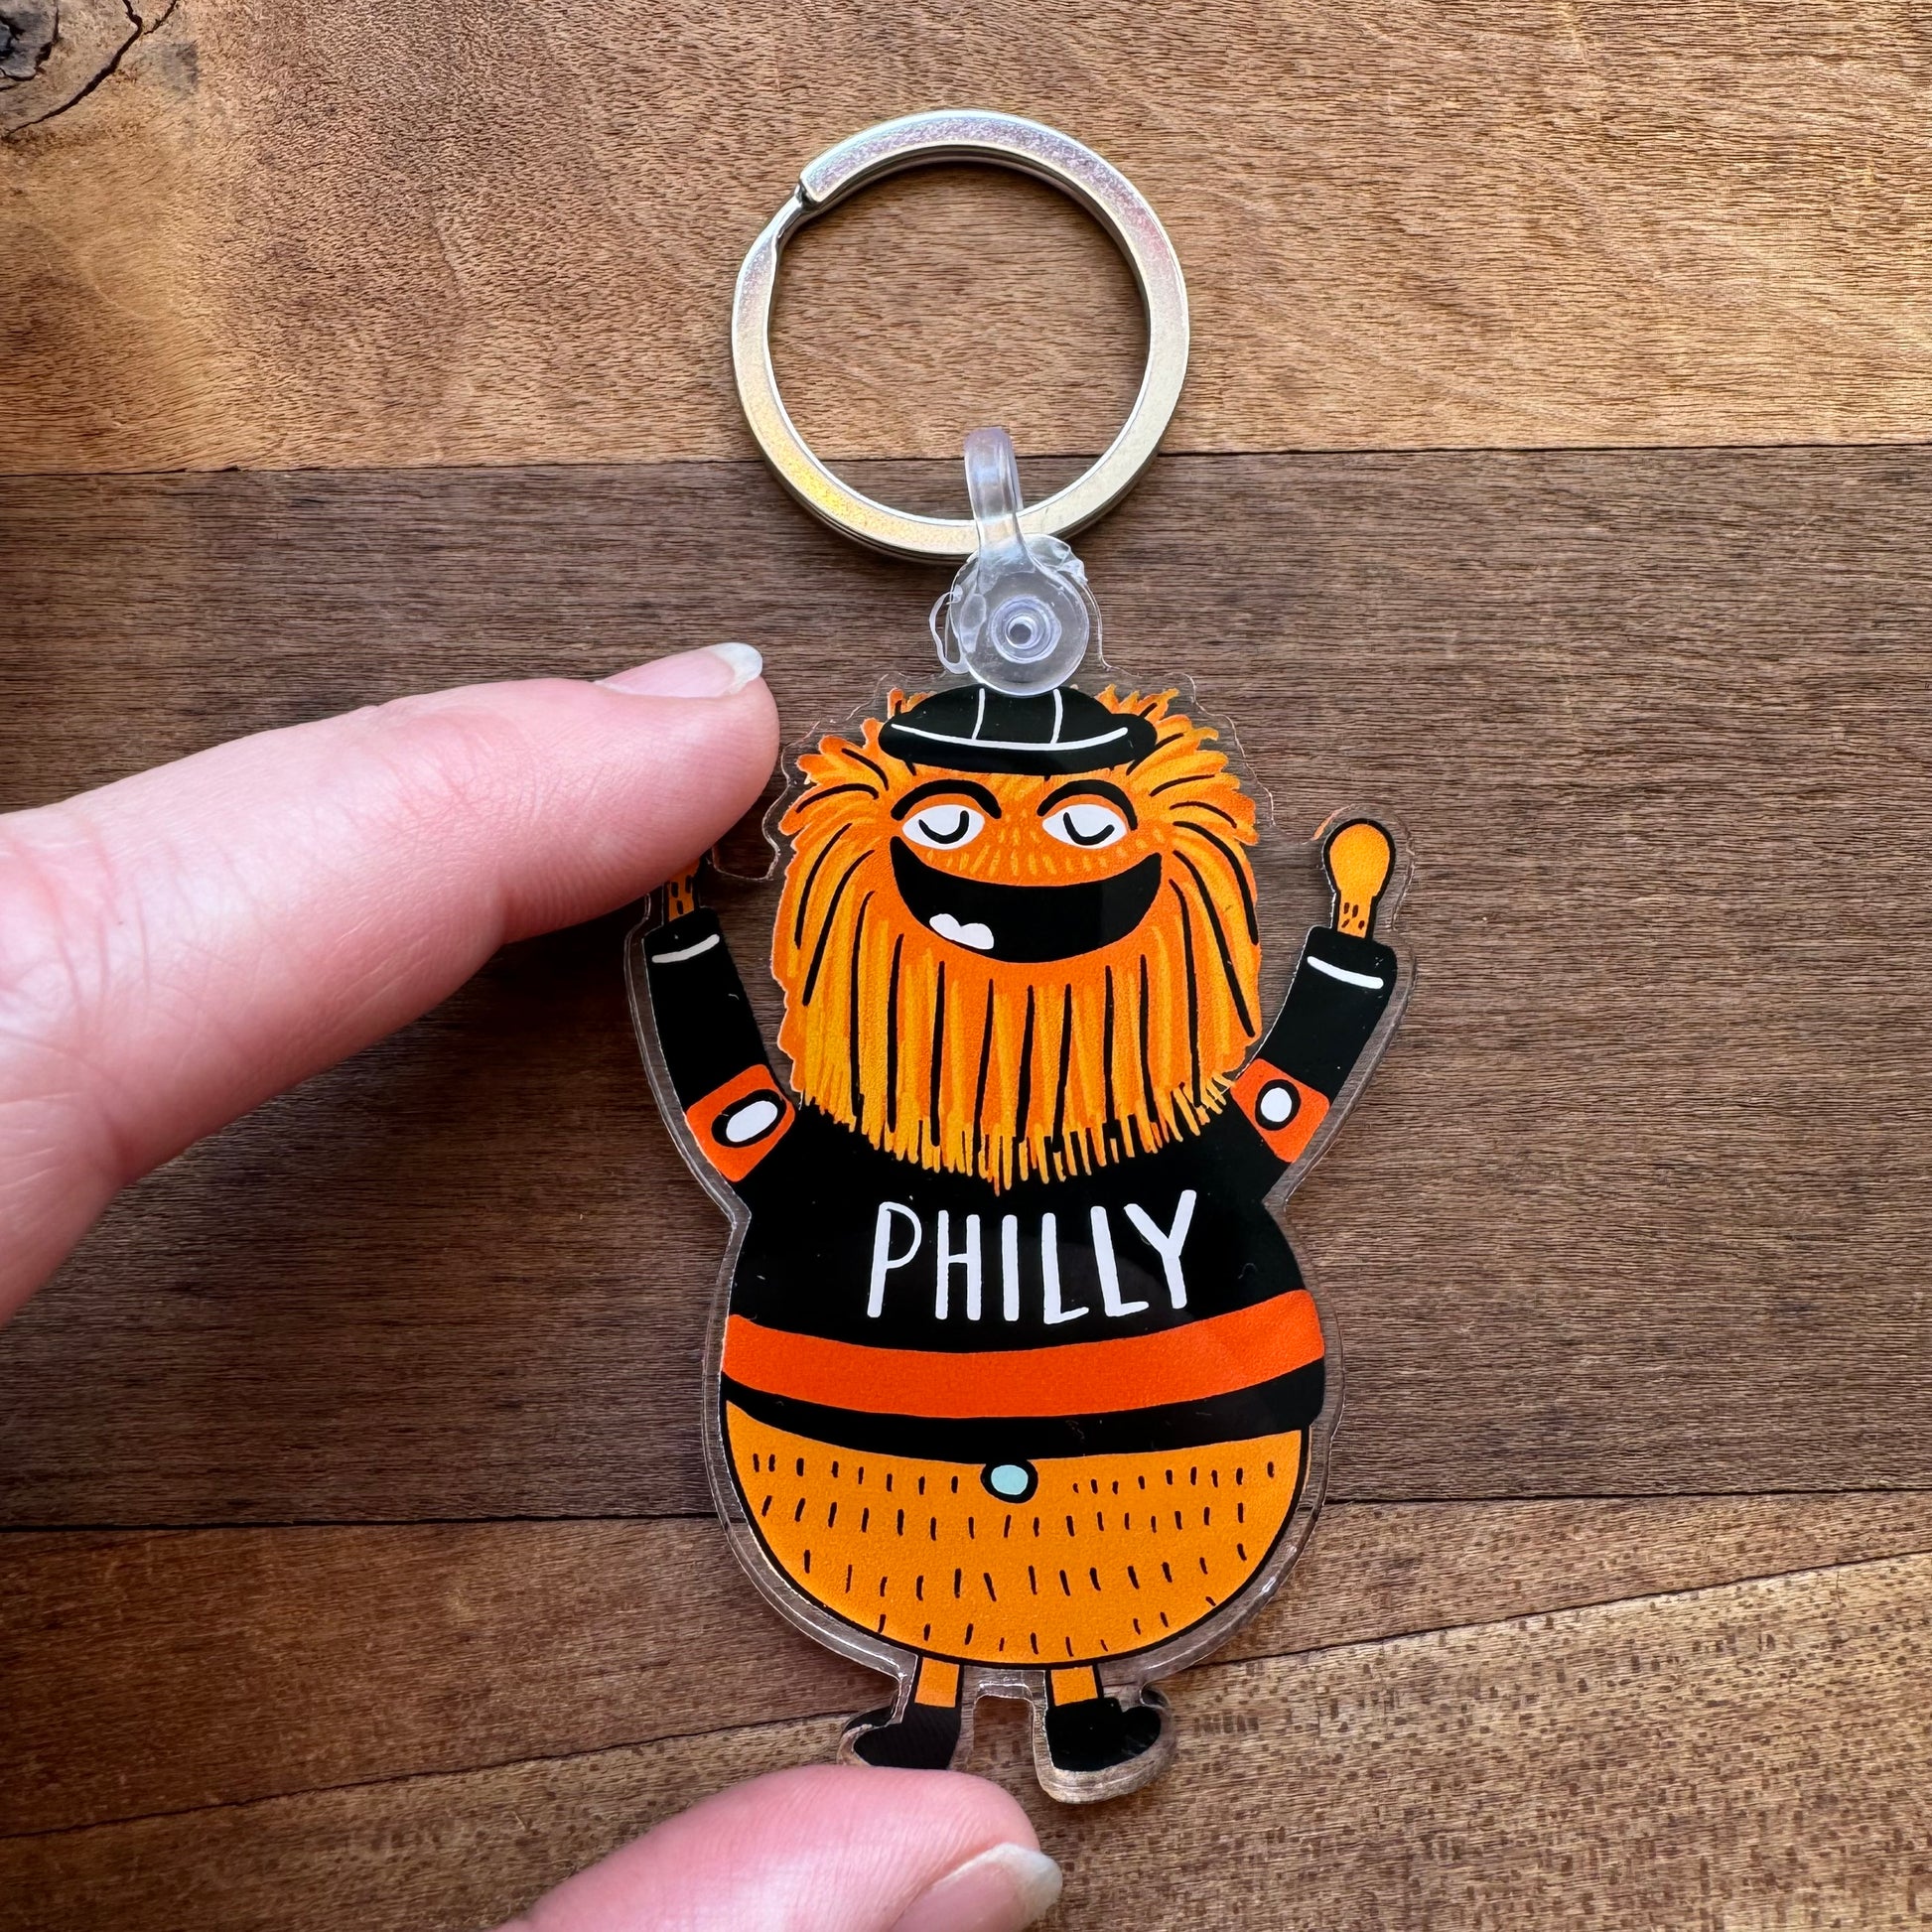 Close-up of a hand holding an Ana Thorne Gritty & Phanatic keychain, showcasing the orange-furred, smiling mascot wearing a black jersey with "PHILLY" written on it. The mascot stands on a wooden surface.